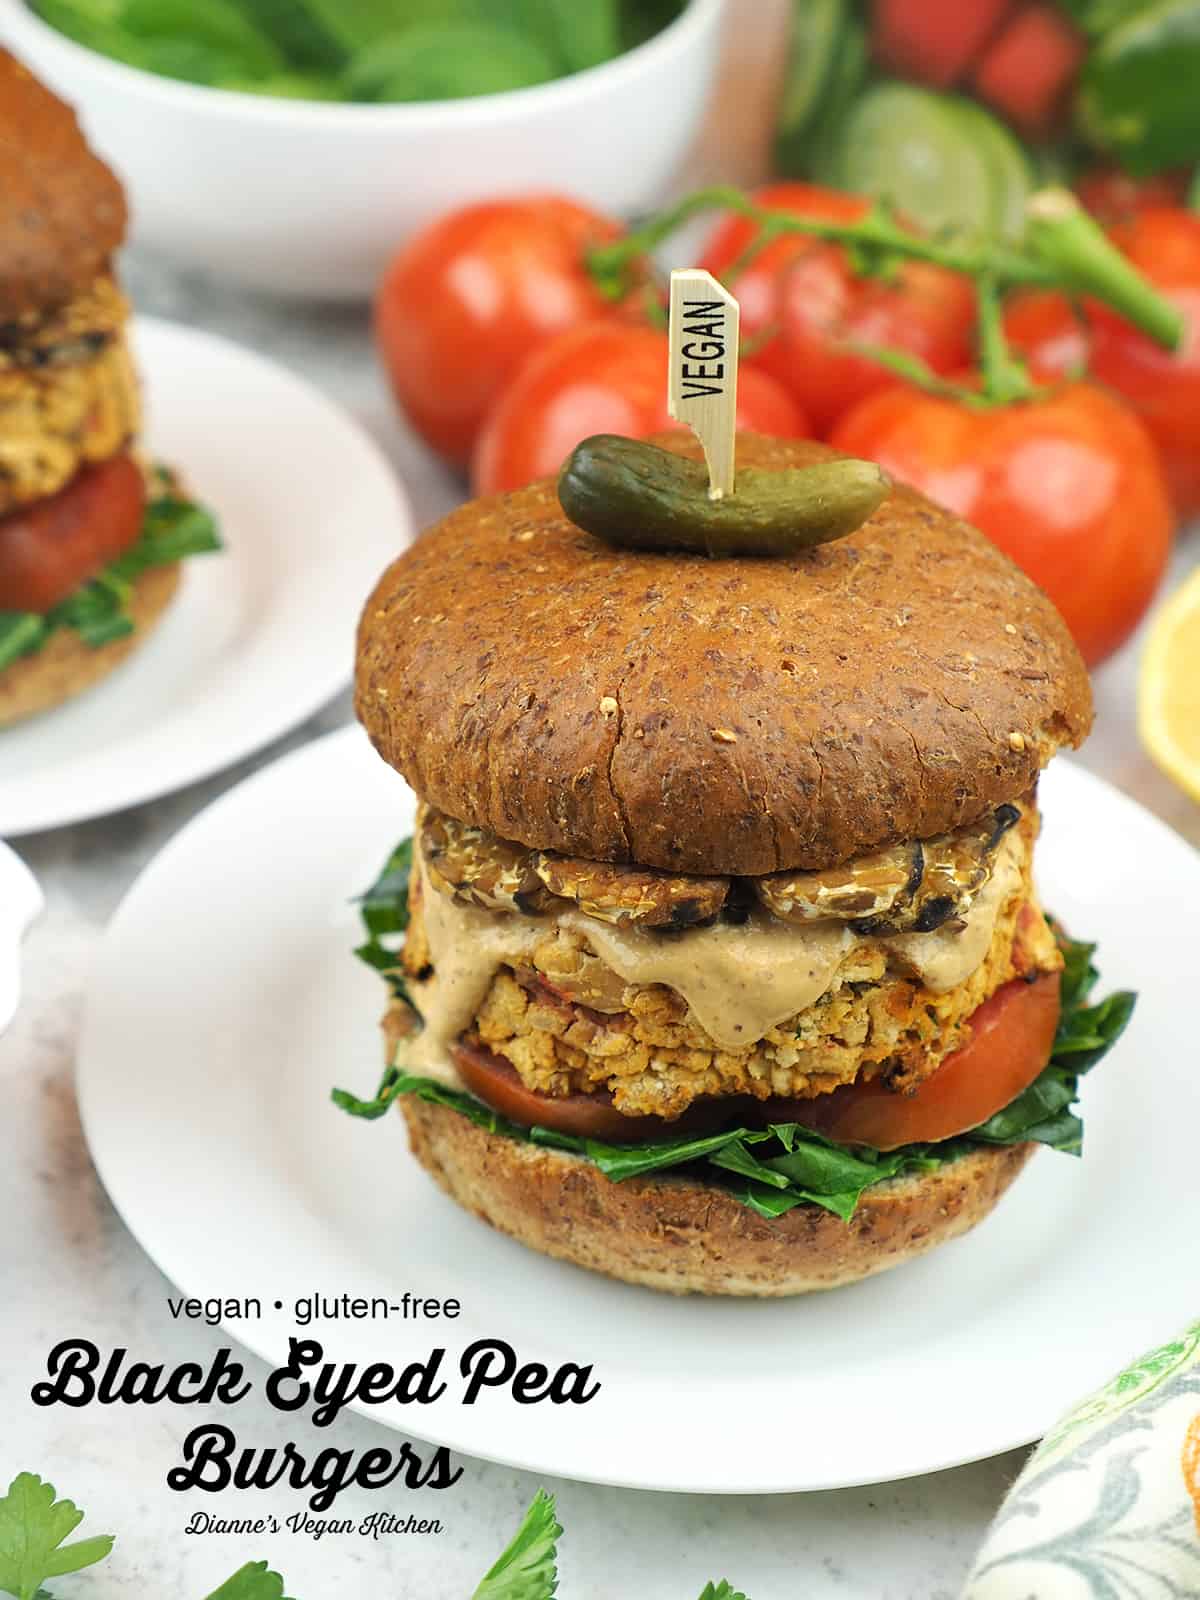 Black Eyed Pea Burger with text overlay 